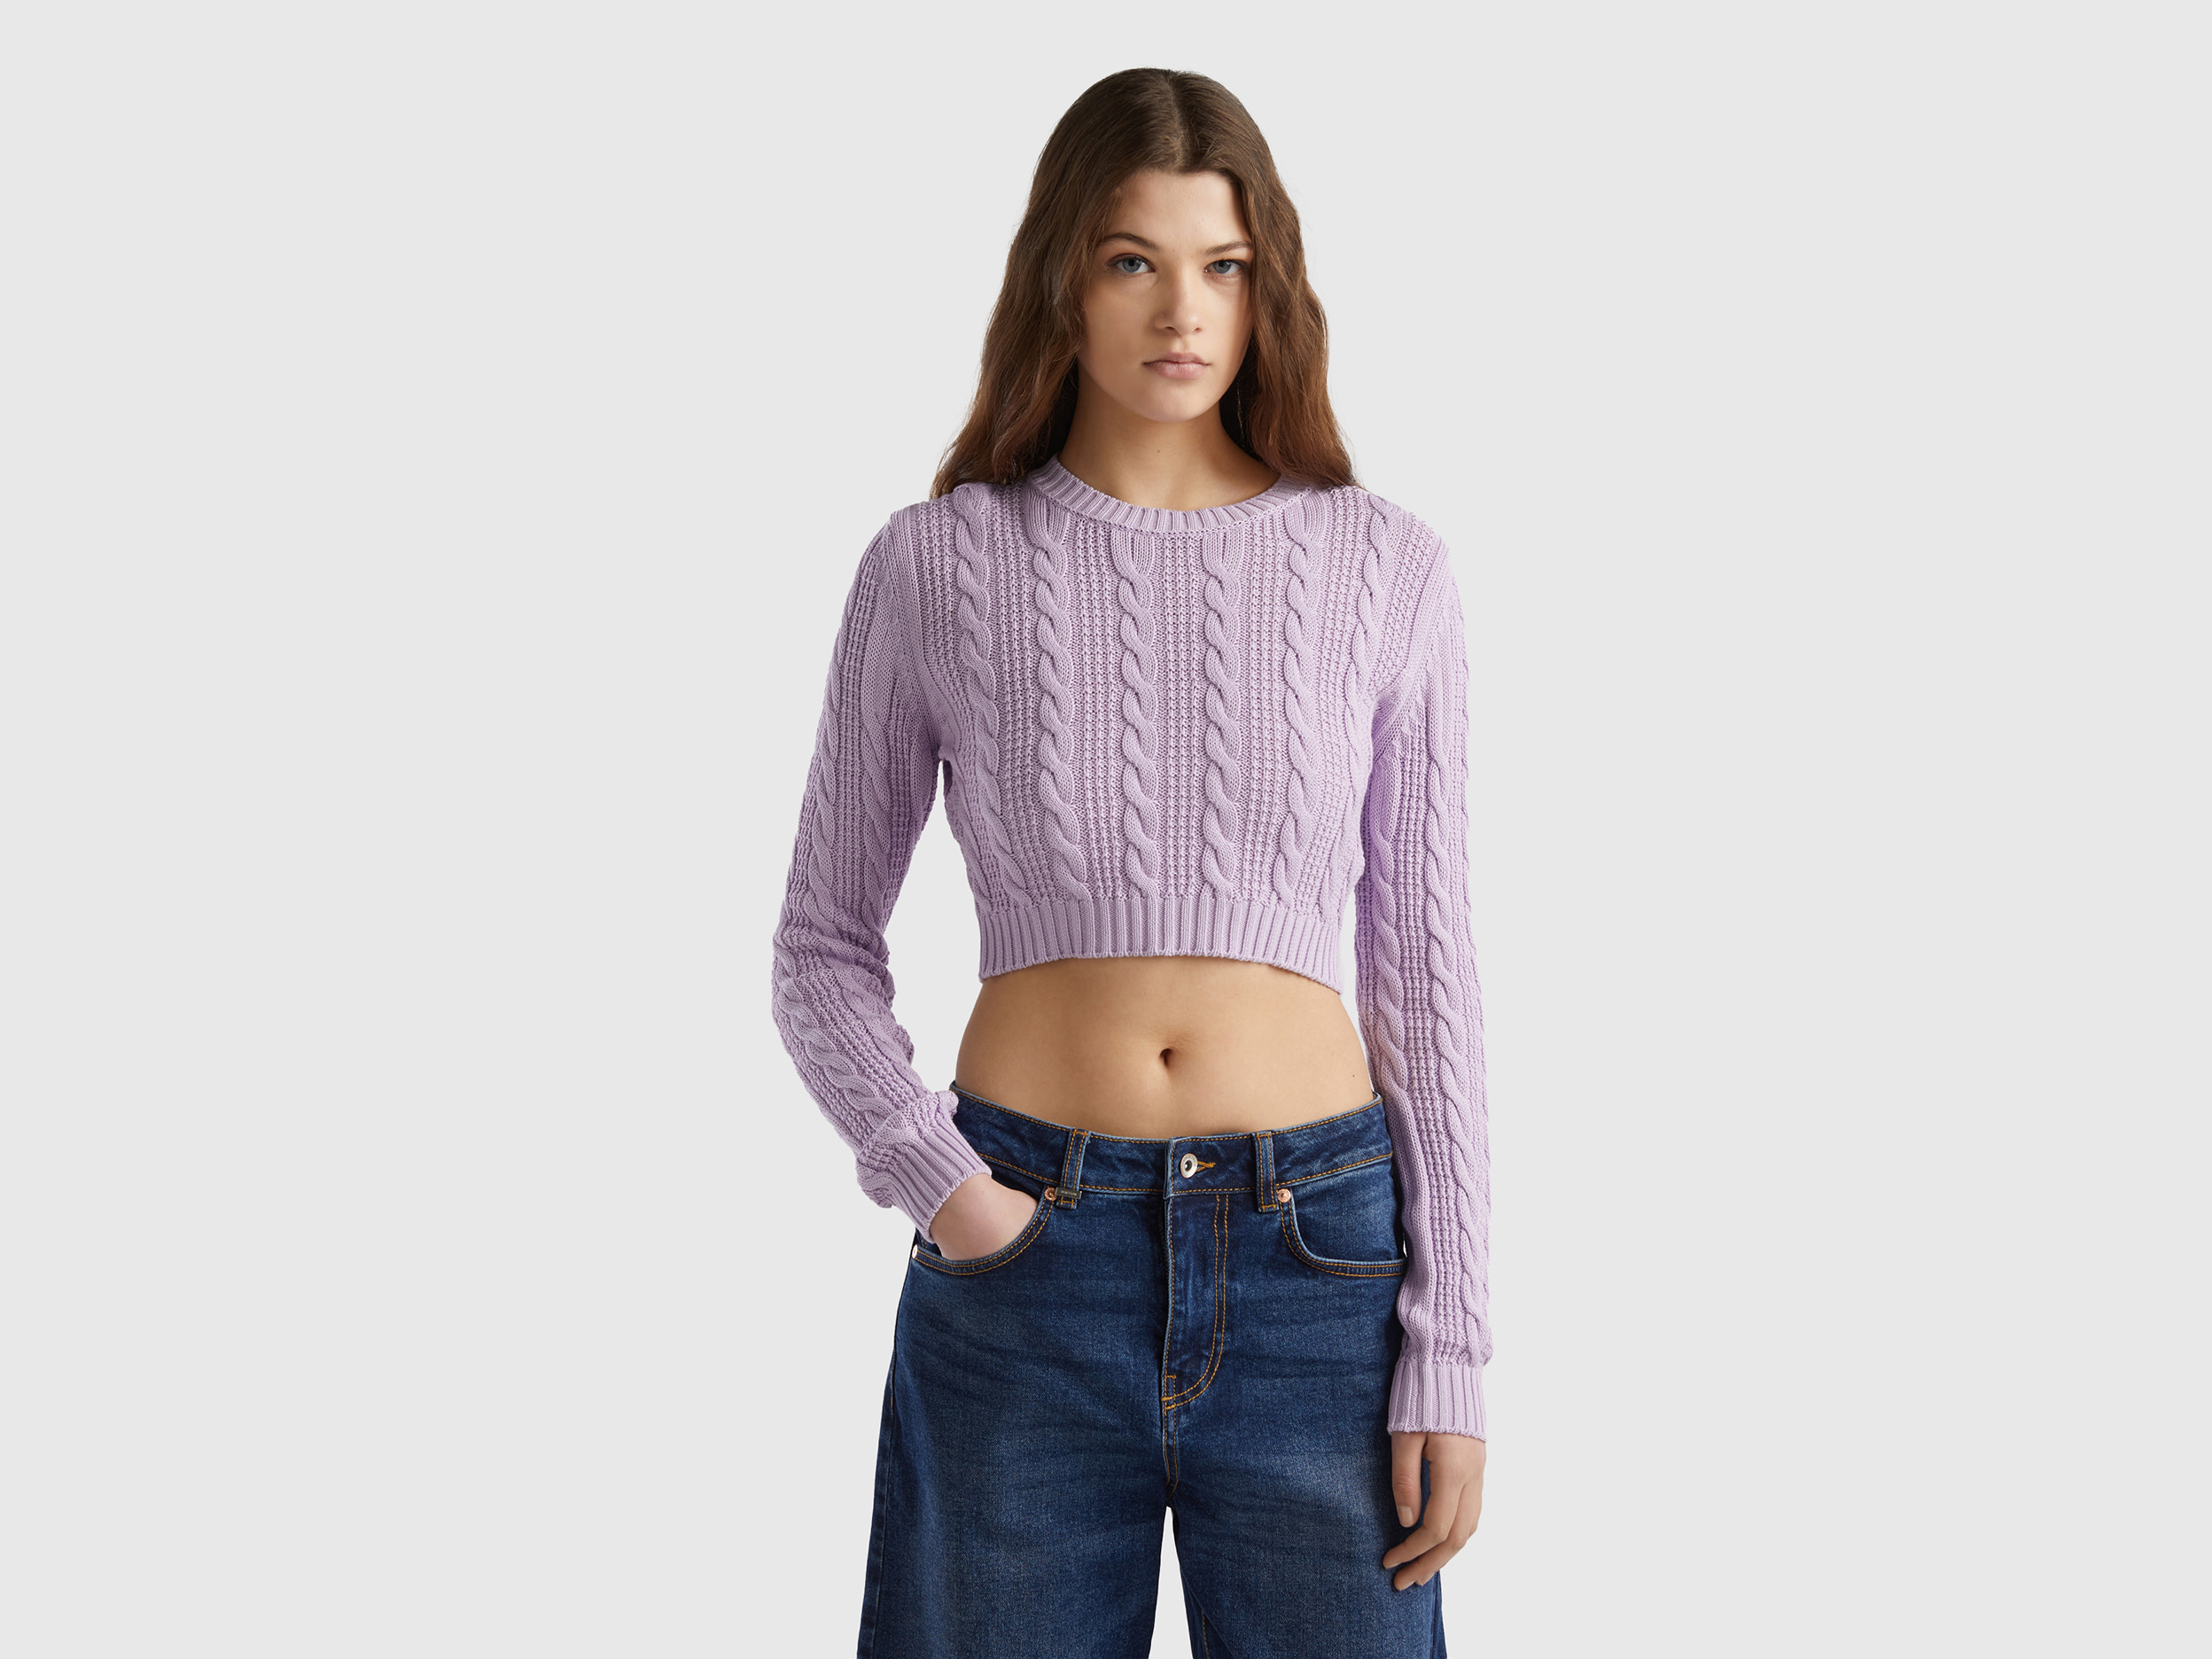 Benetton, Cropped Cable Knit Sweater, size L-XL, Lilac, Women